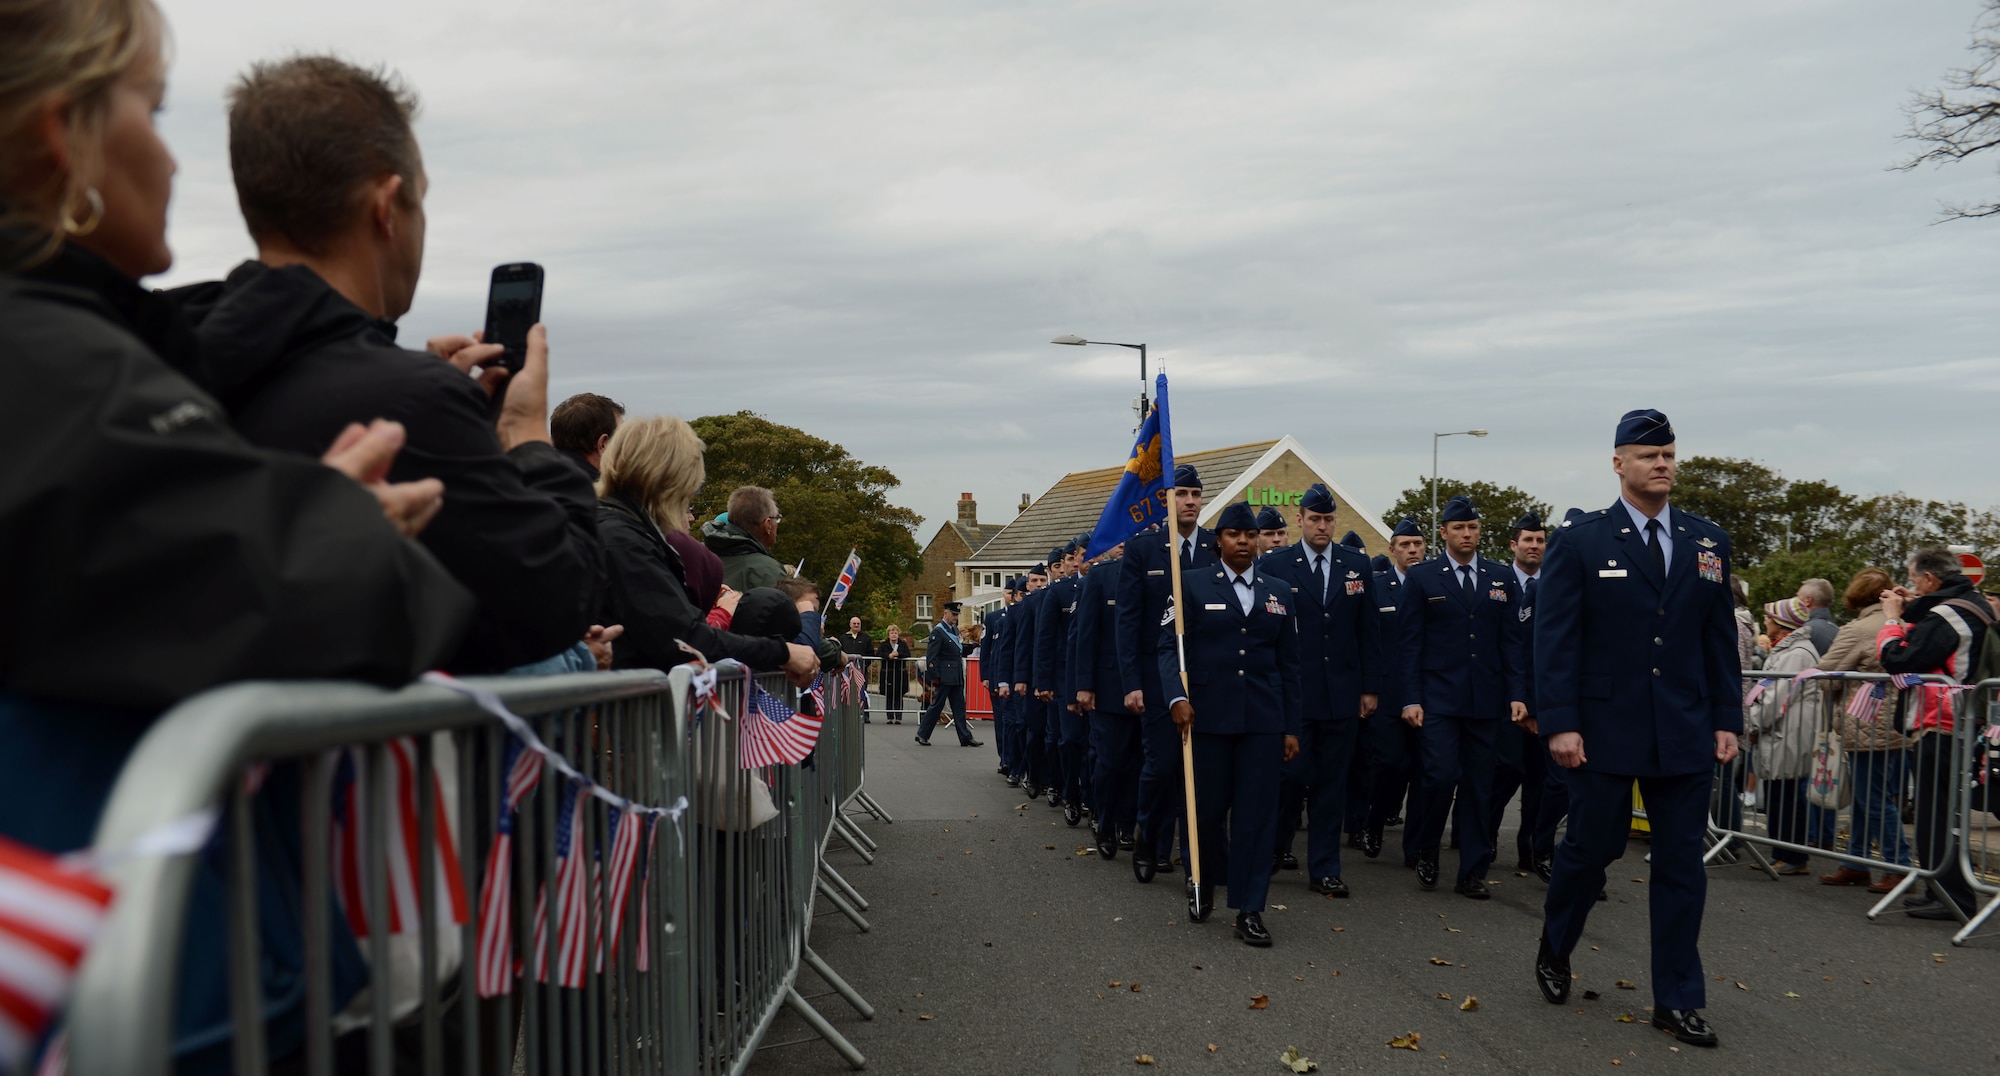 Airmen from the 67th Special Operations Squadron march in a parade Oct. 4, 2014, in Hunstanton, England. The parade commemorated the Airmen who aided the town during a flood in 1953, saving numerous lives. (U.S. Air Force photo/Airman 1st Class Preston Webb/Released)